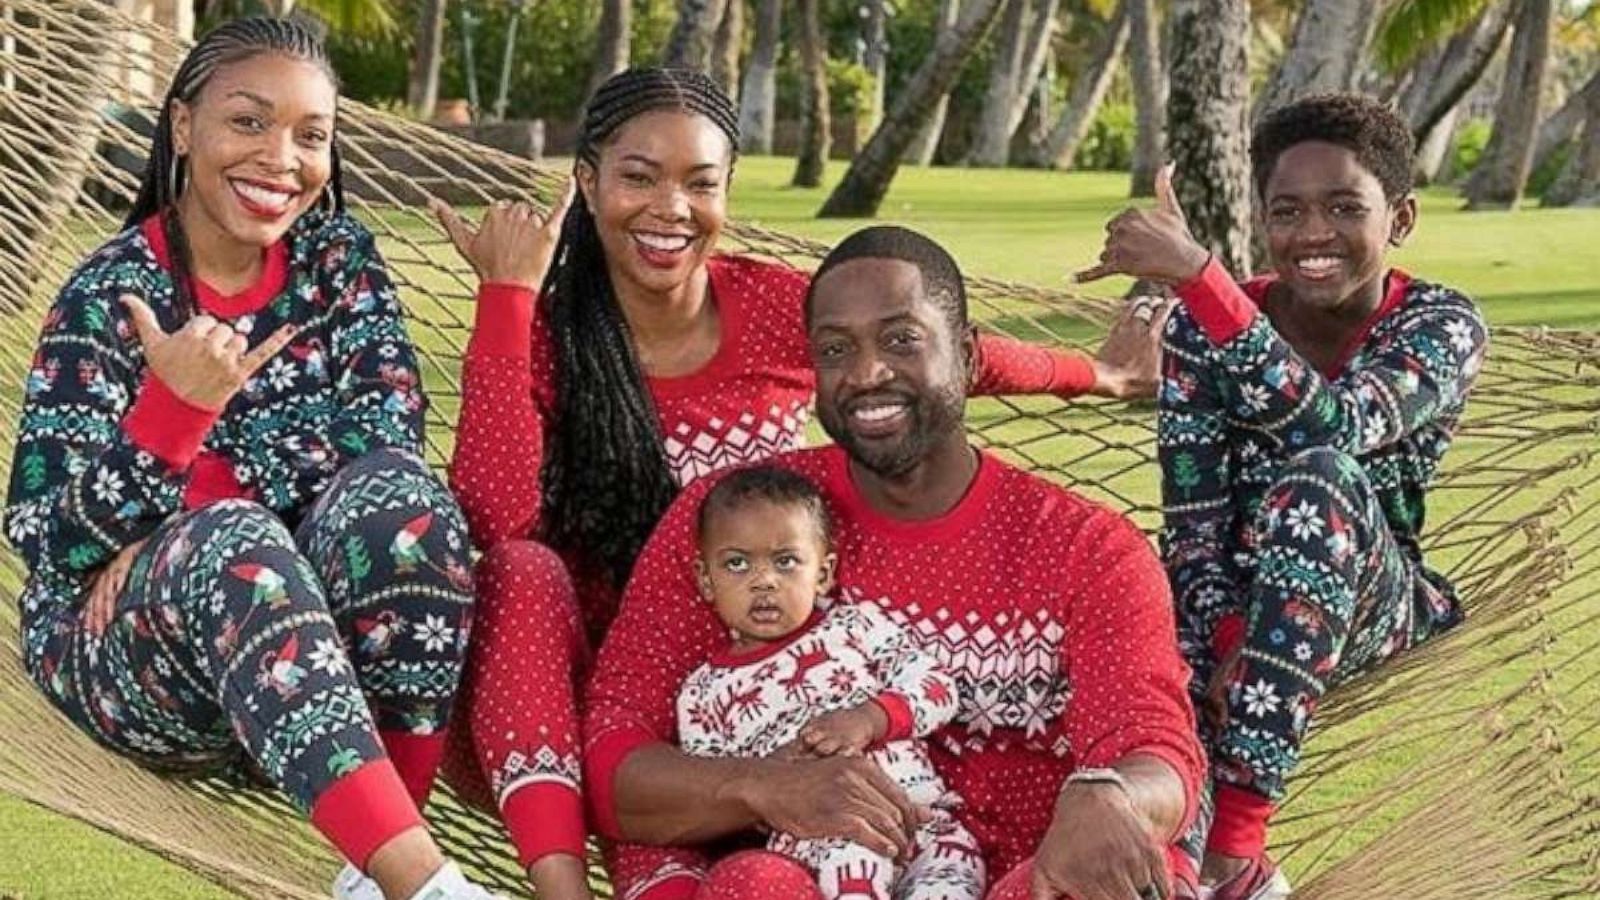 Gabrielle Union and Dwyane Wade Share Hawaii Family Trip Photos